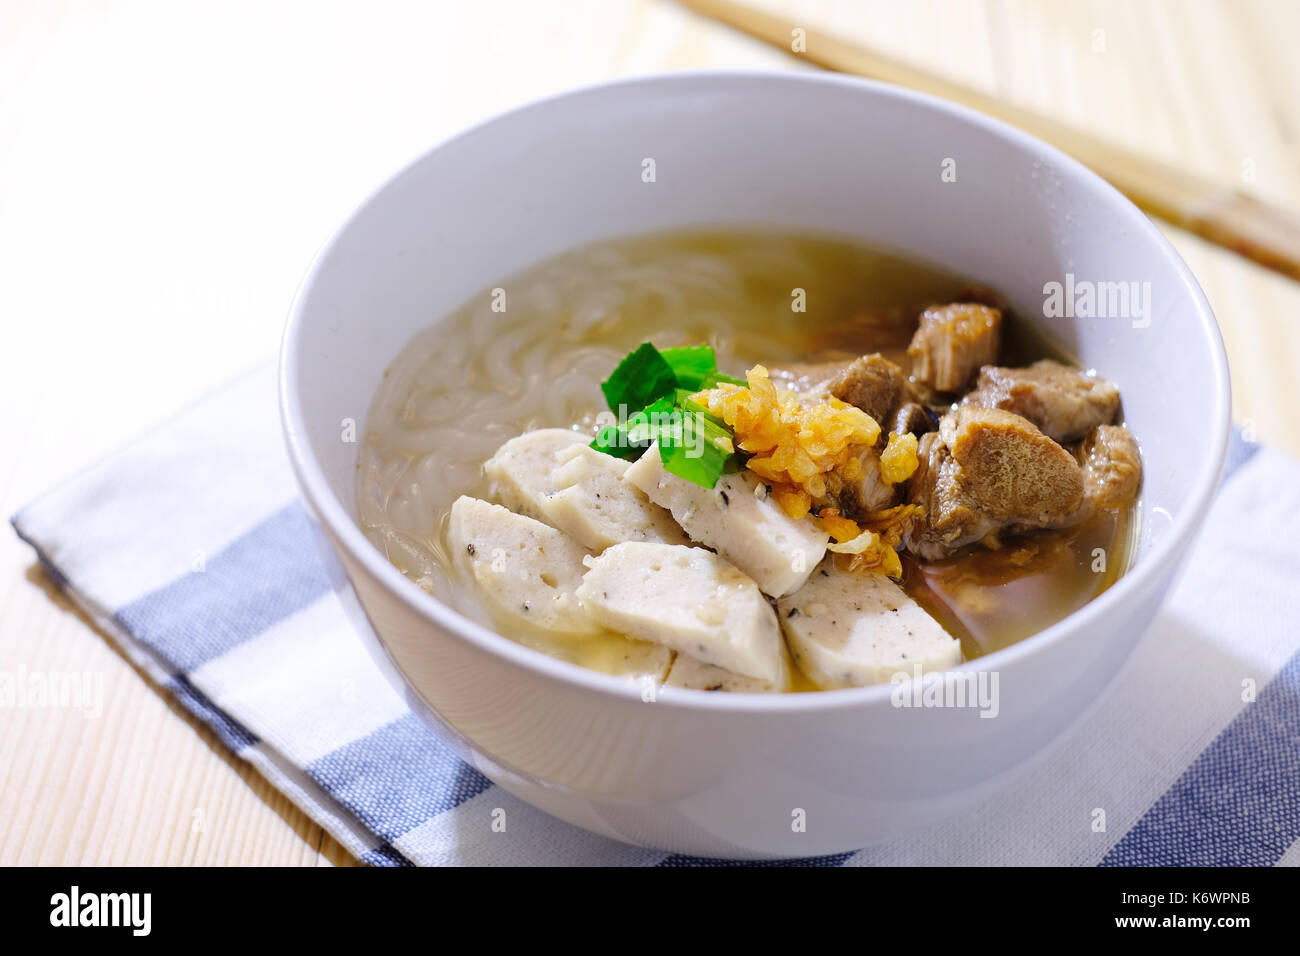 white pork sausage with noodle in soup, asian style Stock Photo